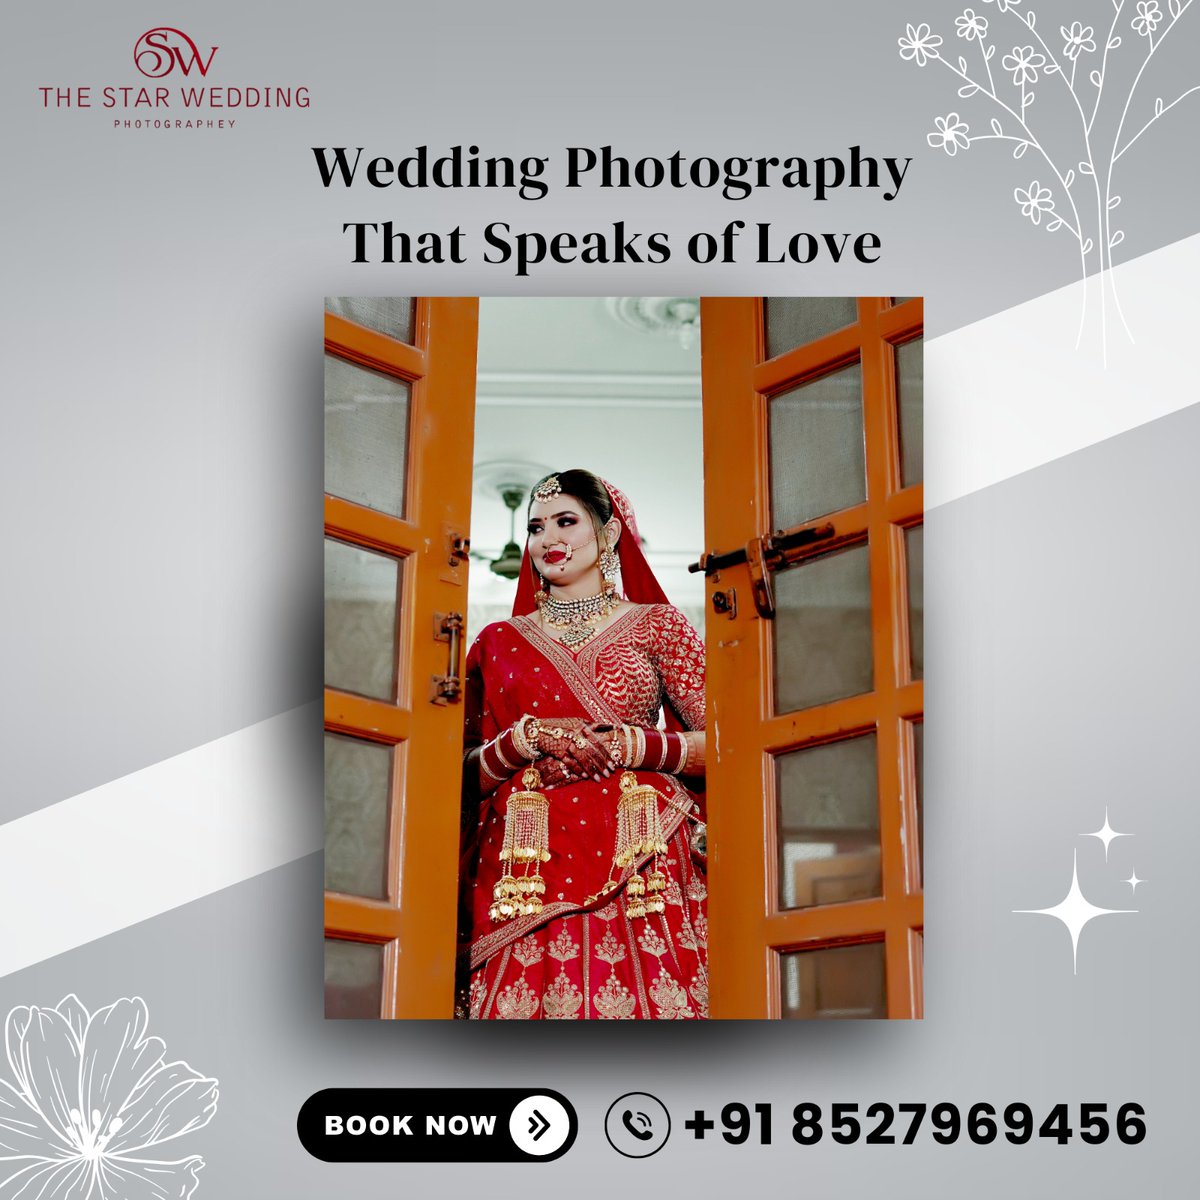 Wedding Photography That Speaks of Love
.
For more Information Call Us
+91 8527969456
.
#WeddingPhotography
#LoveCaptured
#WeddingMoments
#LoveInTheLens
#WeddingDayMagic
#HappilyEverAfter
#RomanticMoments
#BrideAndGroom
#WeddingBliss
#TrueLoveCaptured
#WeddingStory
#EternalLove